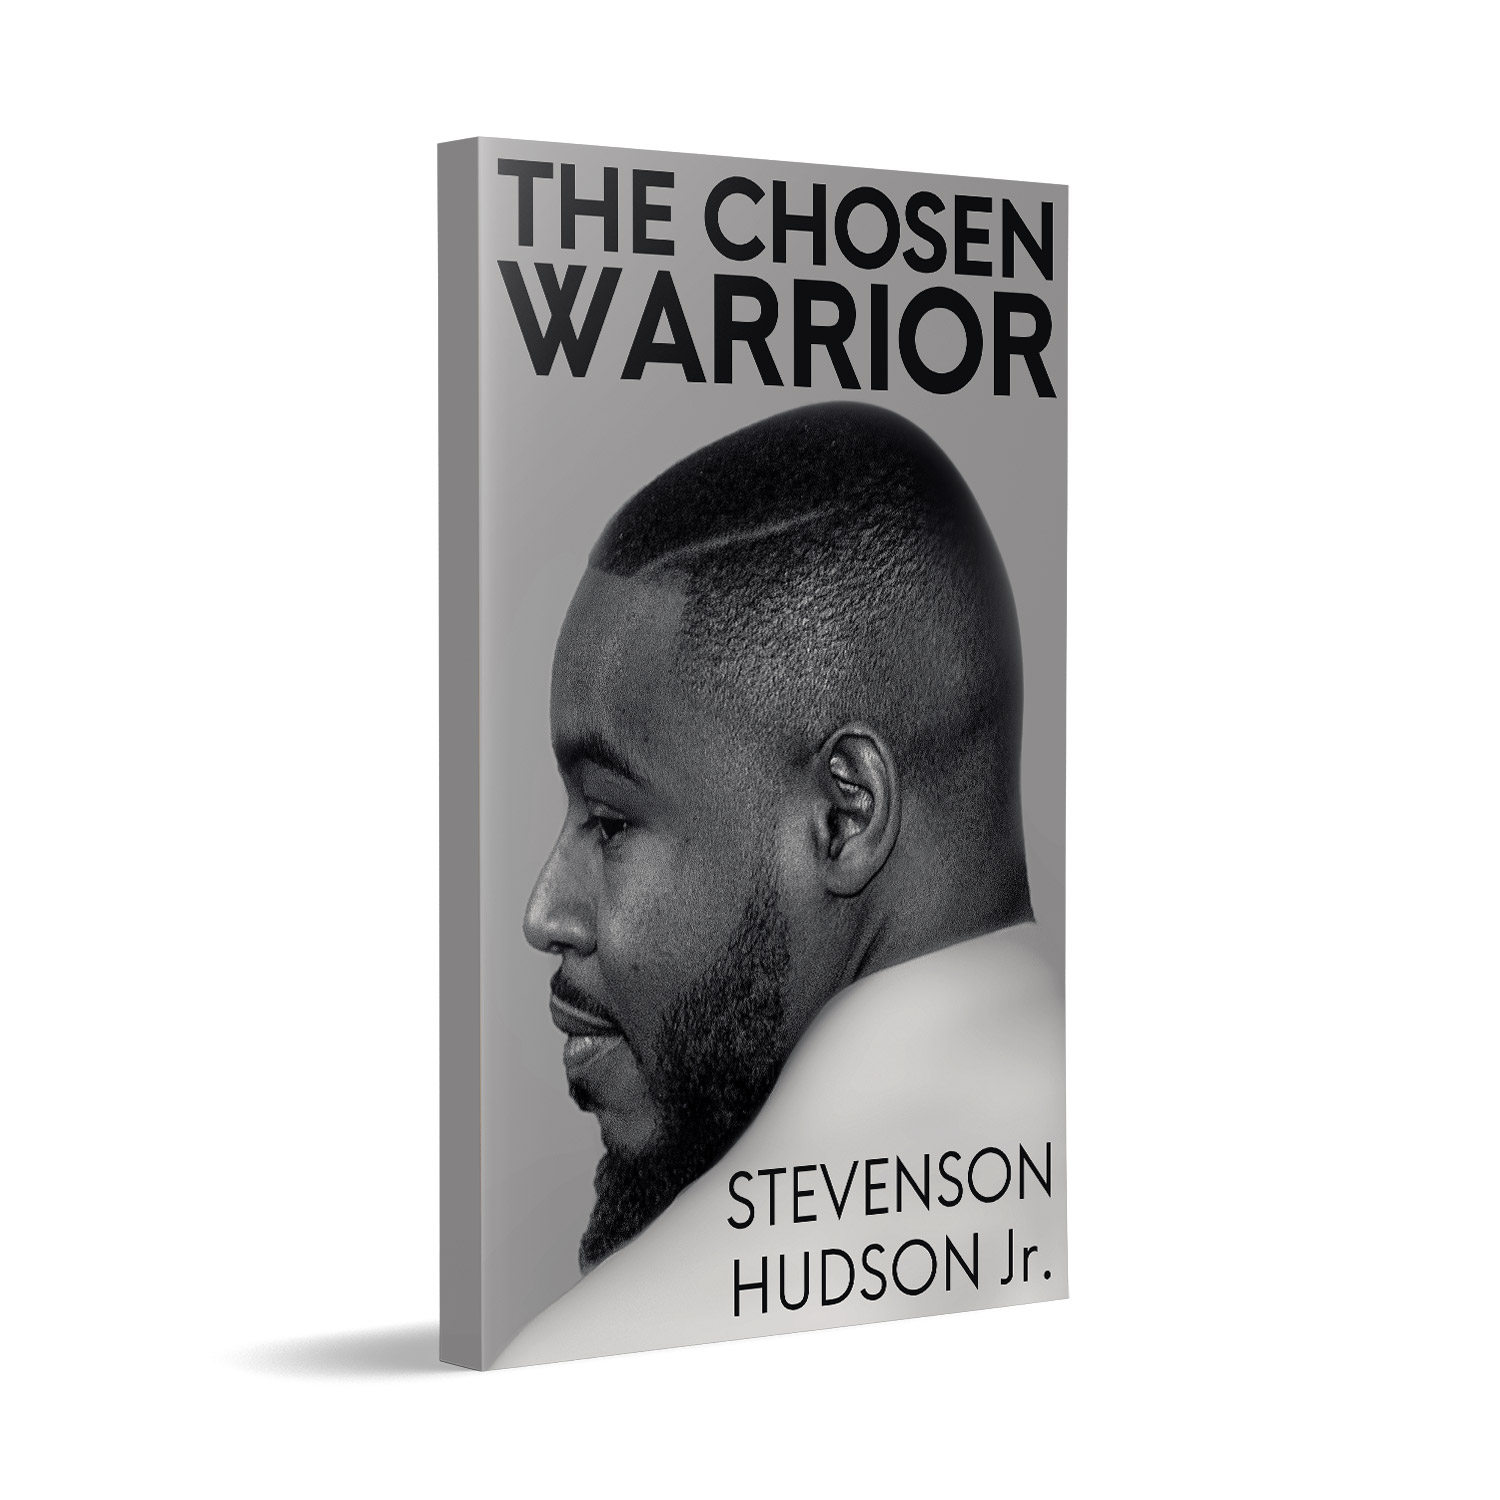 'The Chosen Warrior' is a powerful social memoir, by Stevenson Hudson Jr. The book cover and interior were designed by Mark Thomas, of coverness.com. To find out more about my book design services, please visit www.coverness.com.